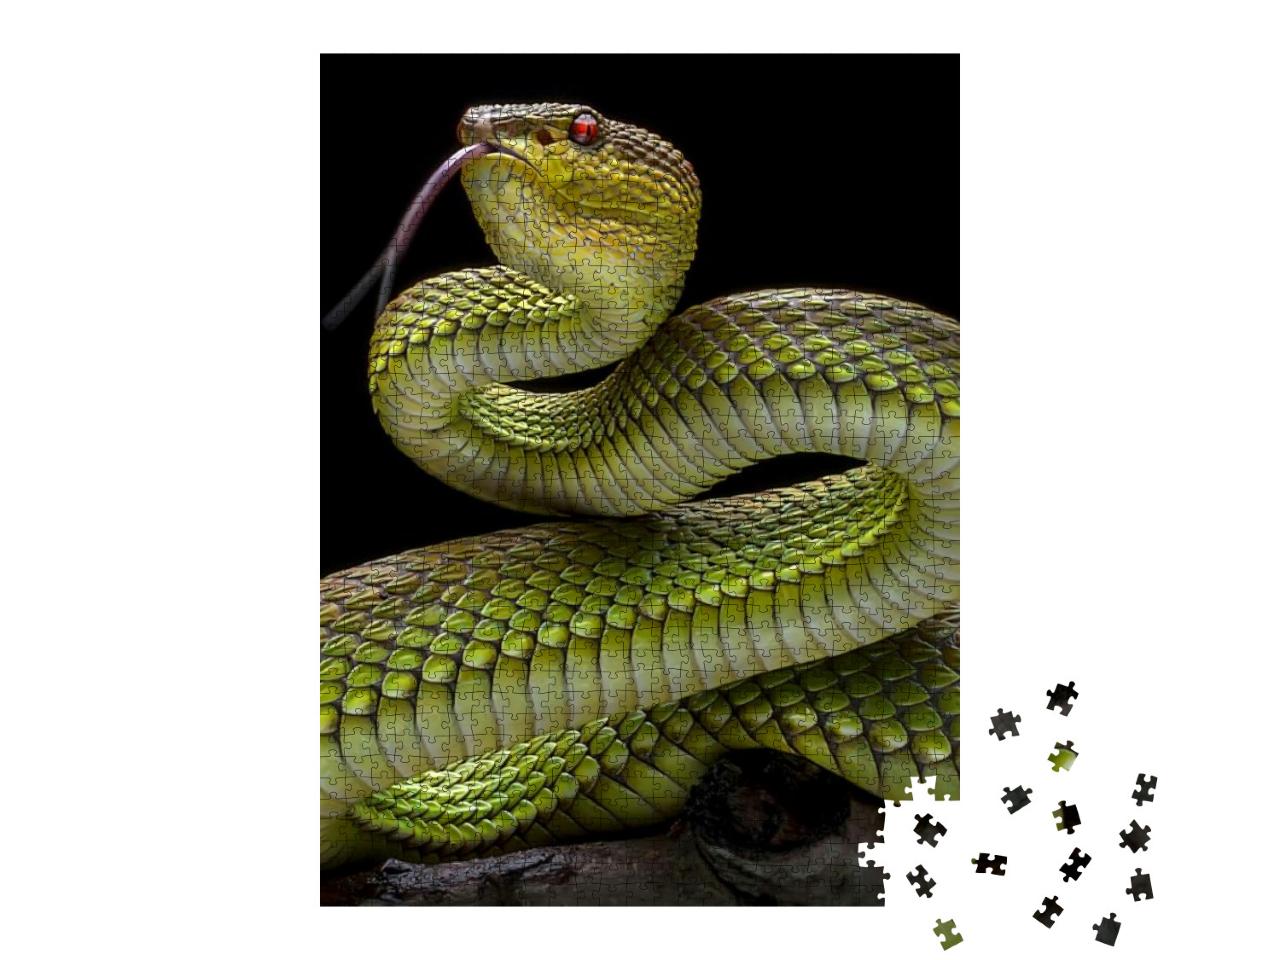 Green Goldy Skin Viper Snake 2001026 - Exotic Reptile Ani... Jigsaw Puzzle with 1000 pieces